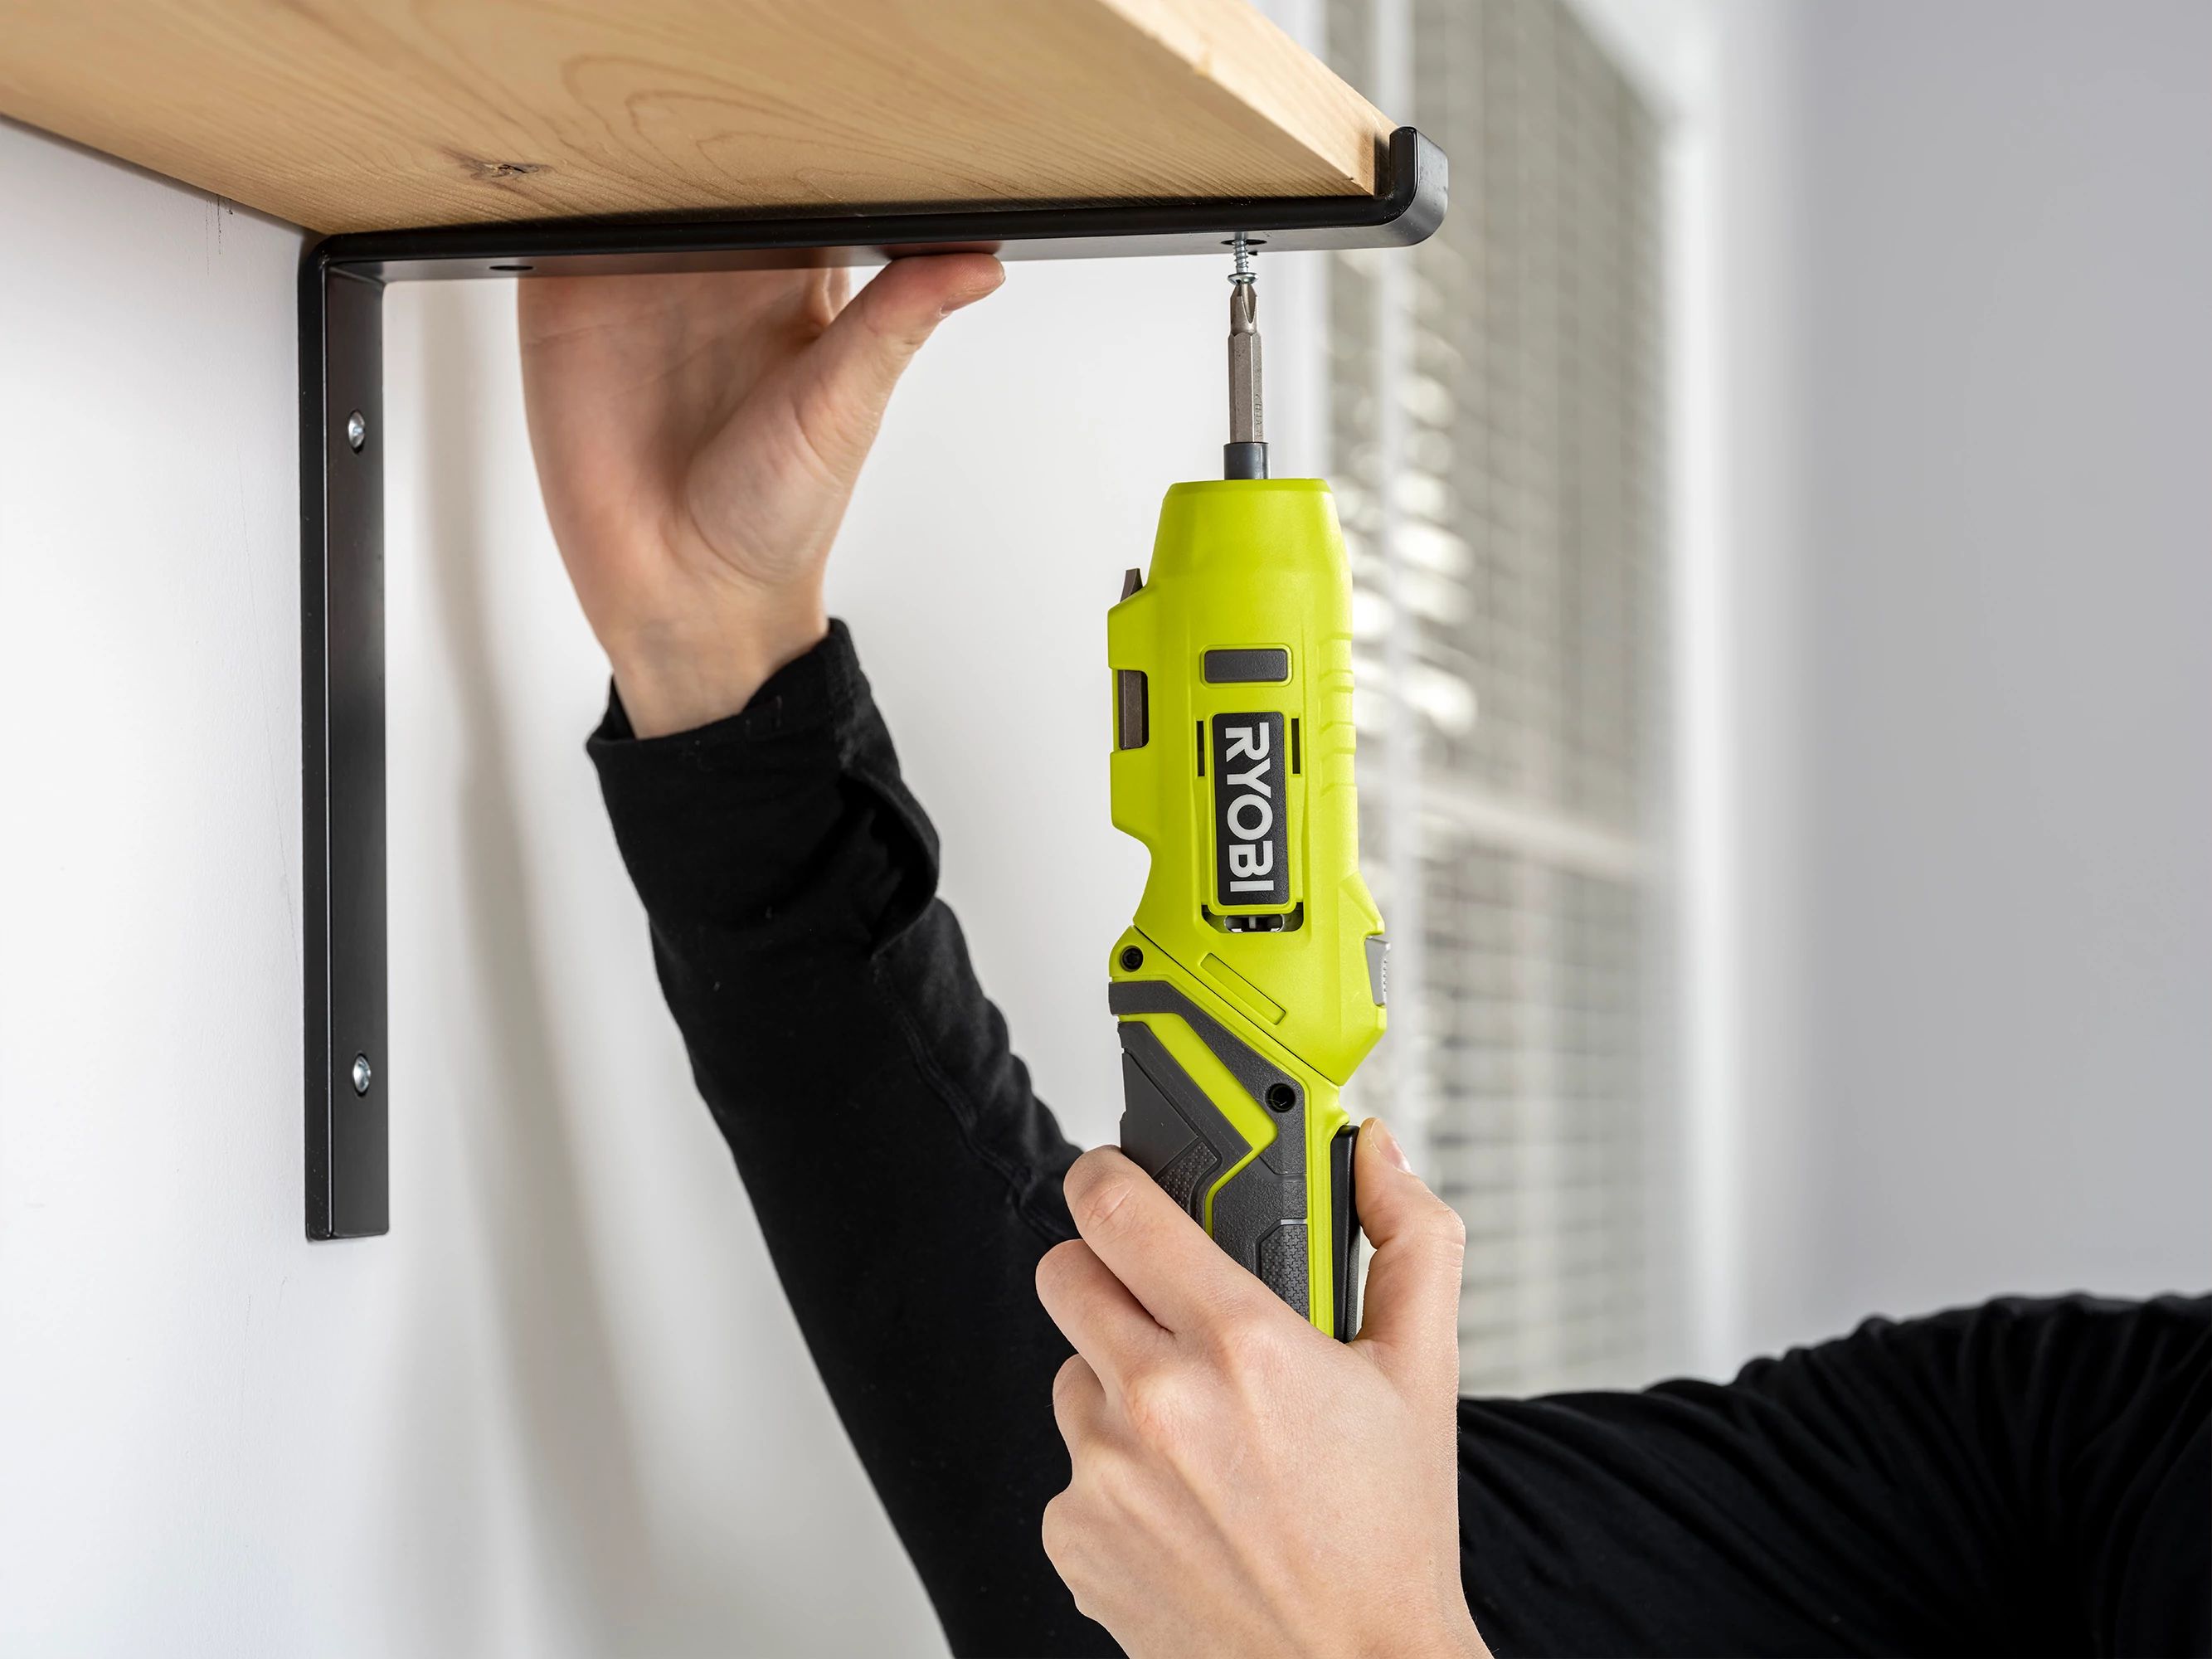 Powered by the RYOBI USB Lithium Battery